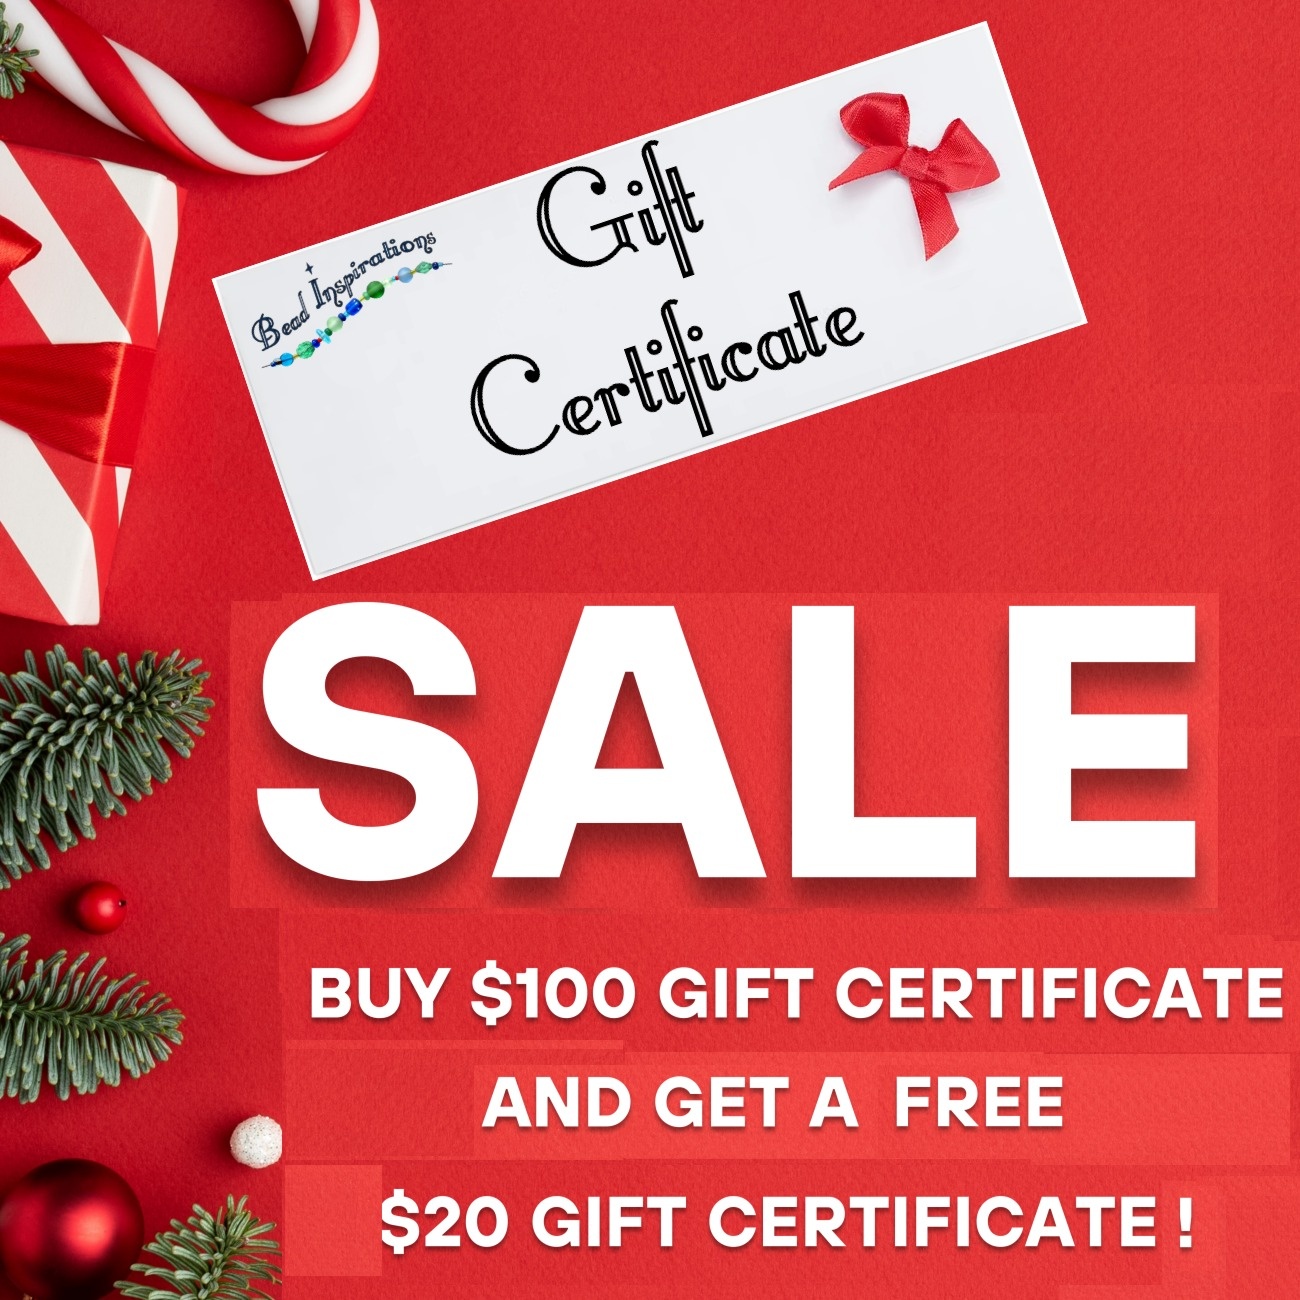 Buy a $100 Gift Certificate Get another $20 Gift Certificate for Free!